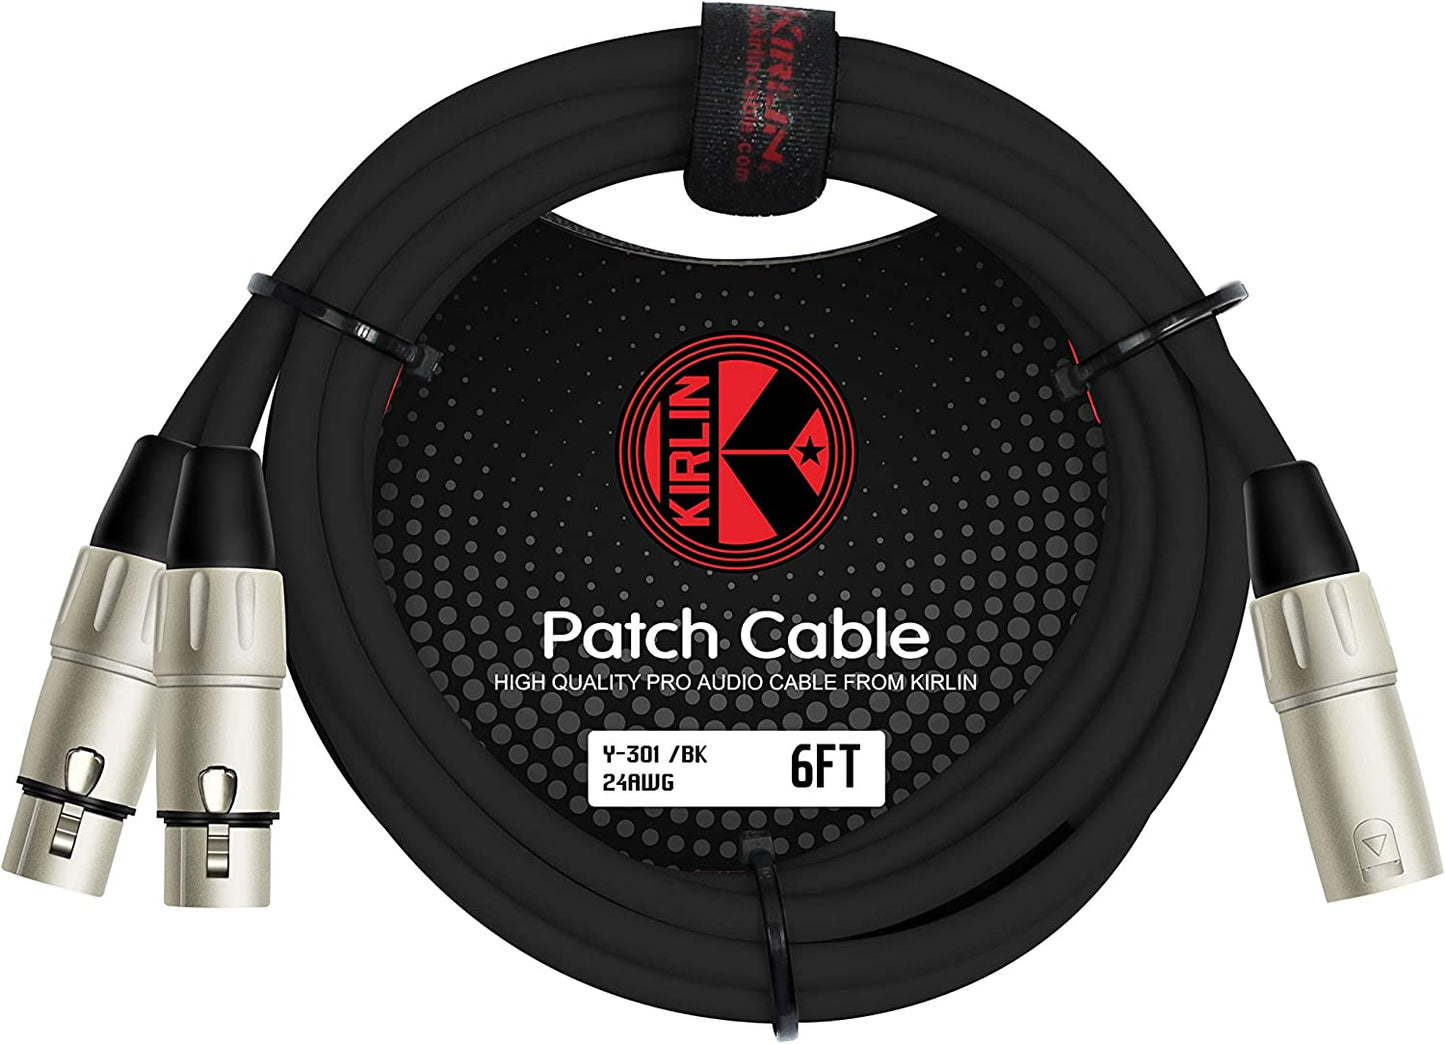 Kirlin Microphone 6FT Y-301/bk Patch Cable 2XLR female to XLR Male